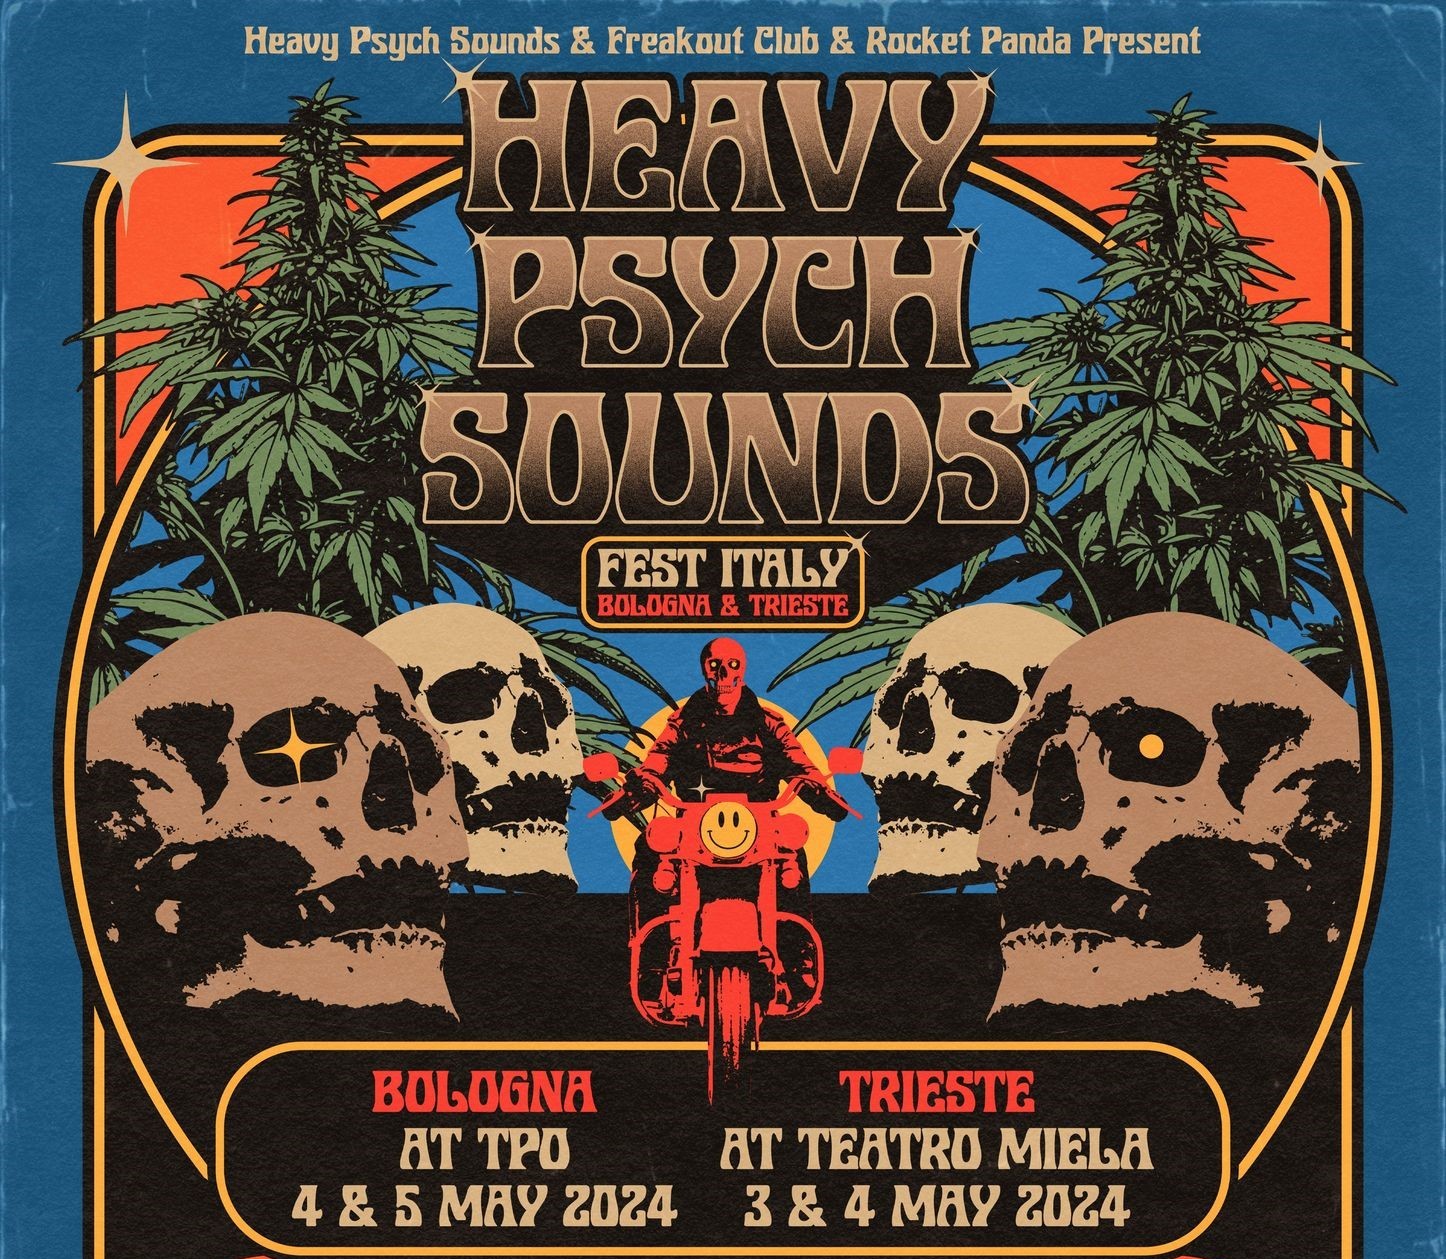 Heavy Psych Sounds Fest 2024 in Bologna & Trieste It's Psychedelic